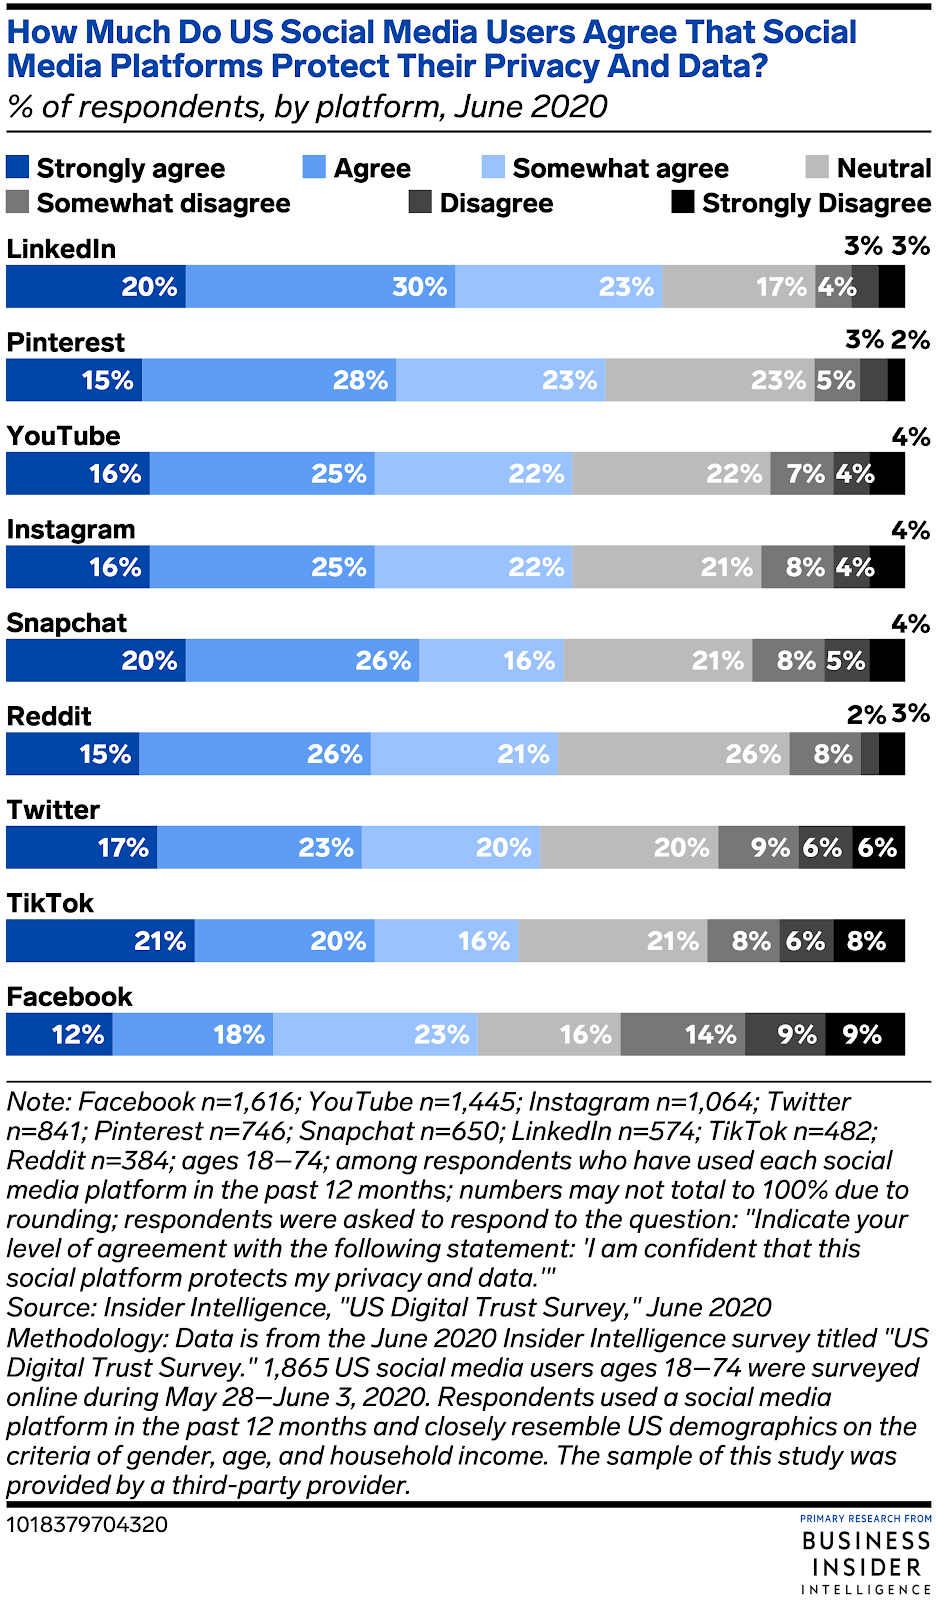 How Much Do US Social Media Users Agree That Social Media Platforms Protect Their Privacy and Data